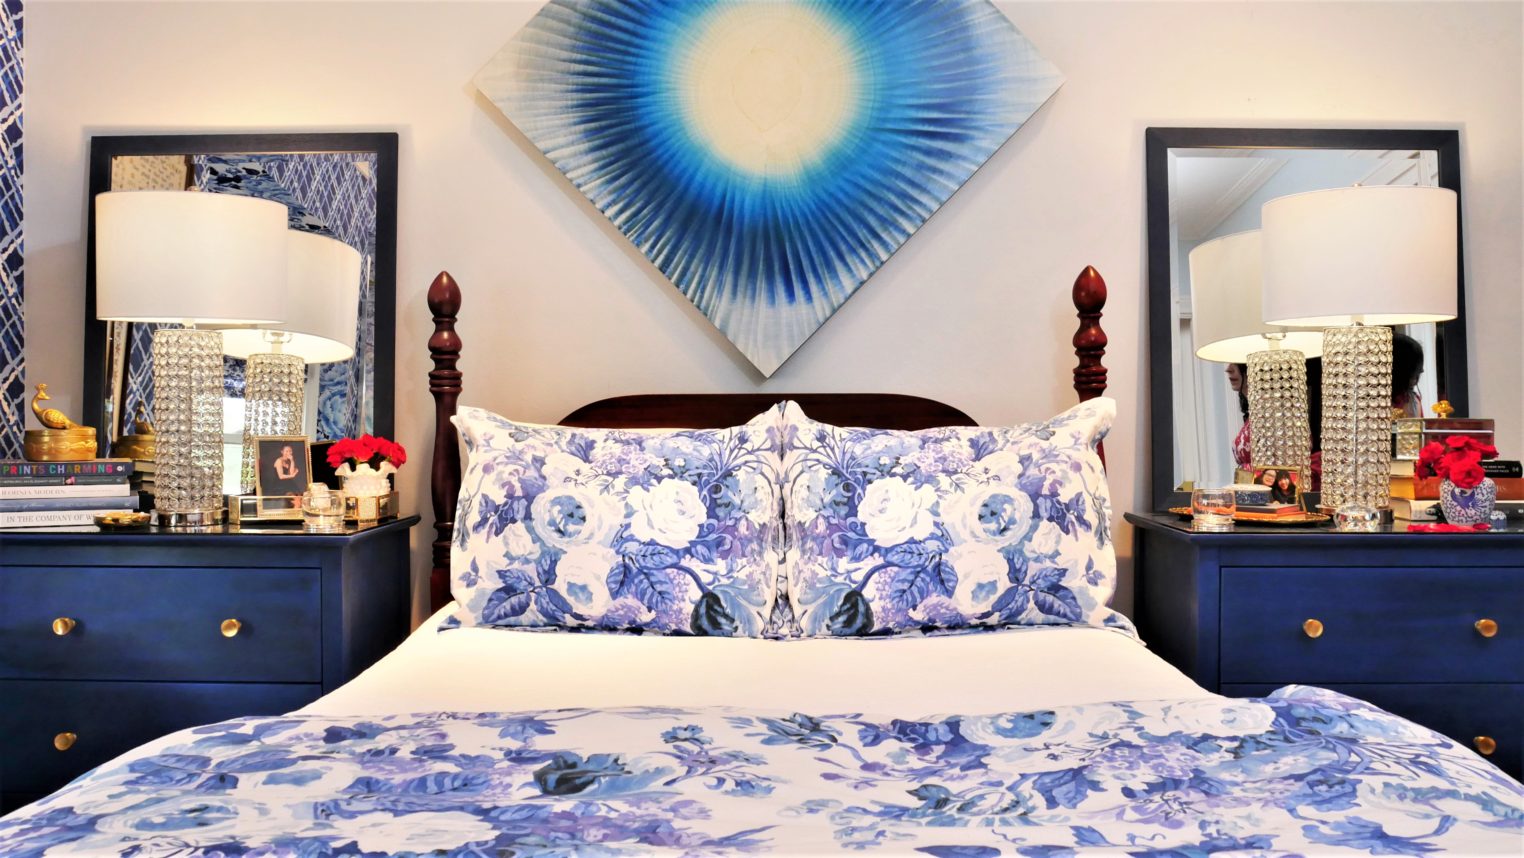 Luxury bedding by Peacock Alley and painting by Roi James. Details on the Pillow Goddess blog!